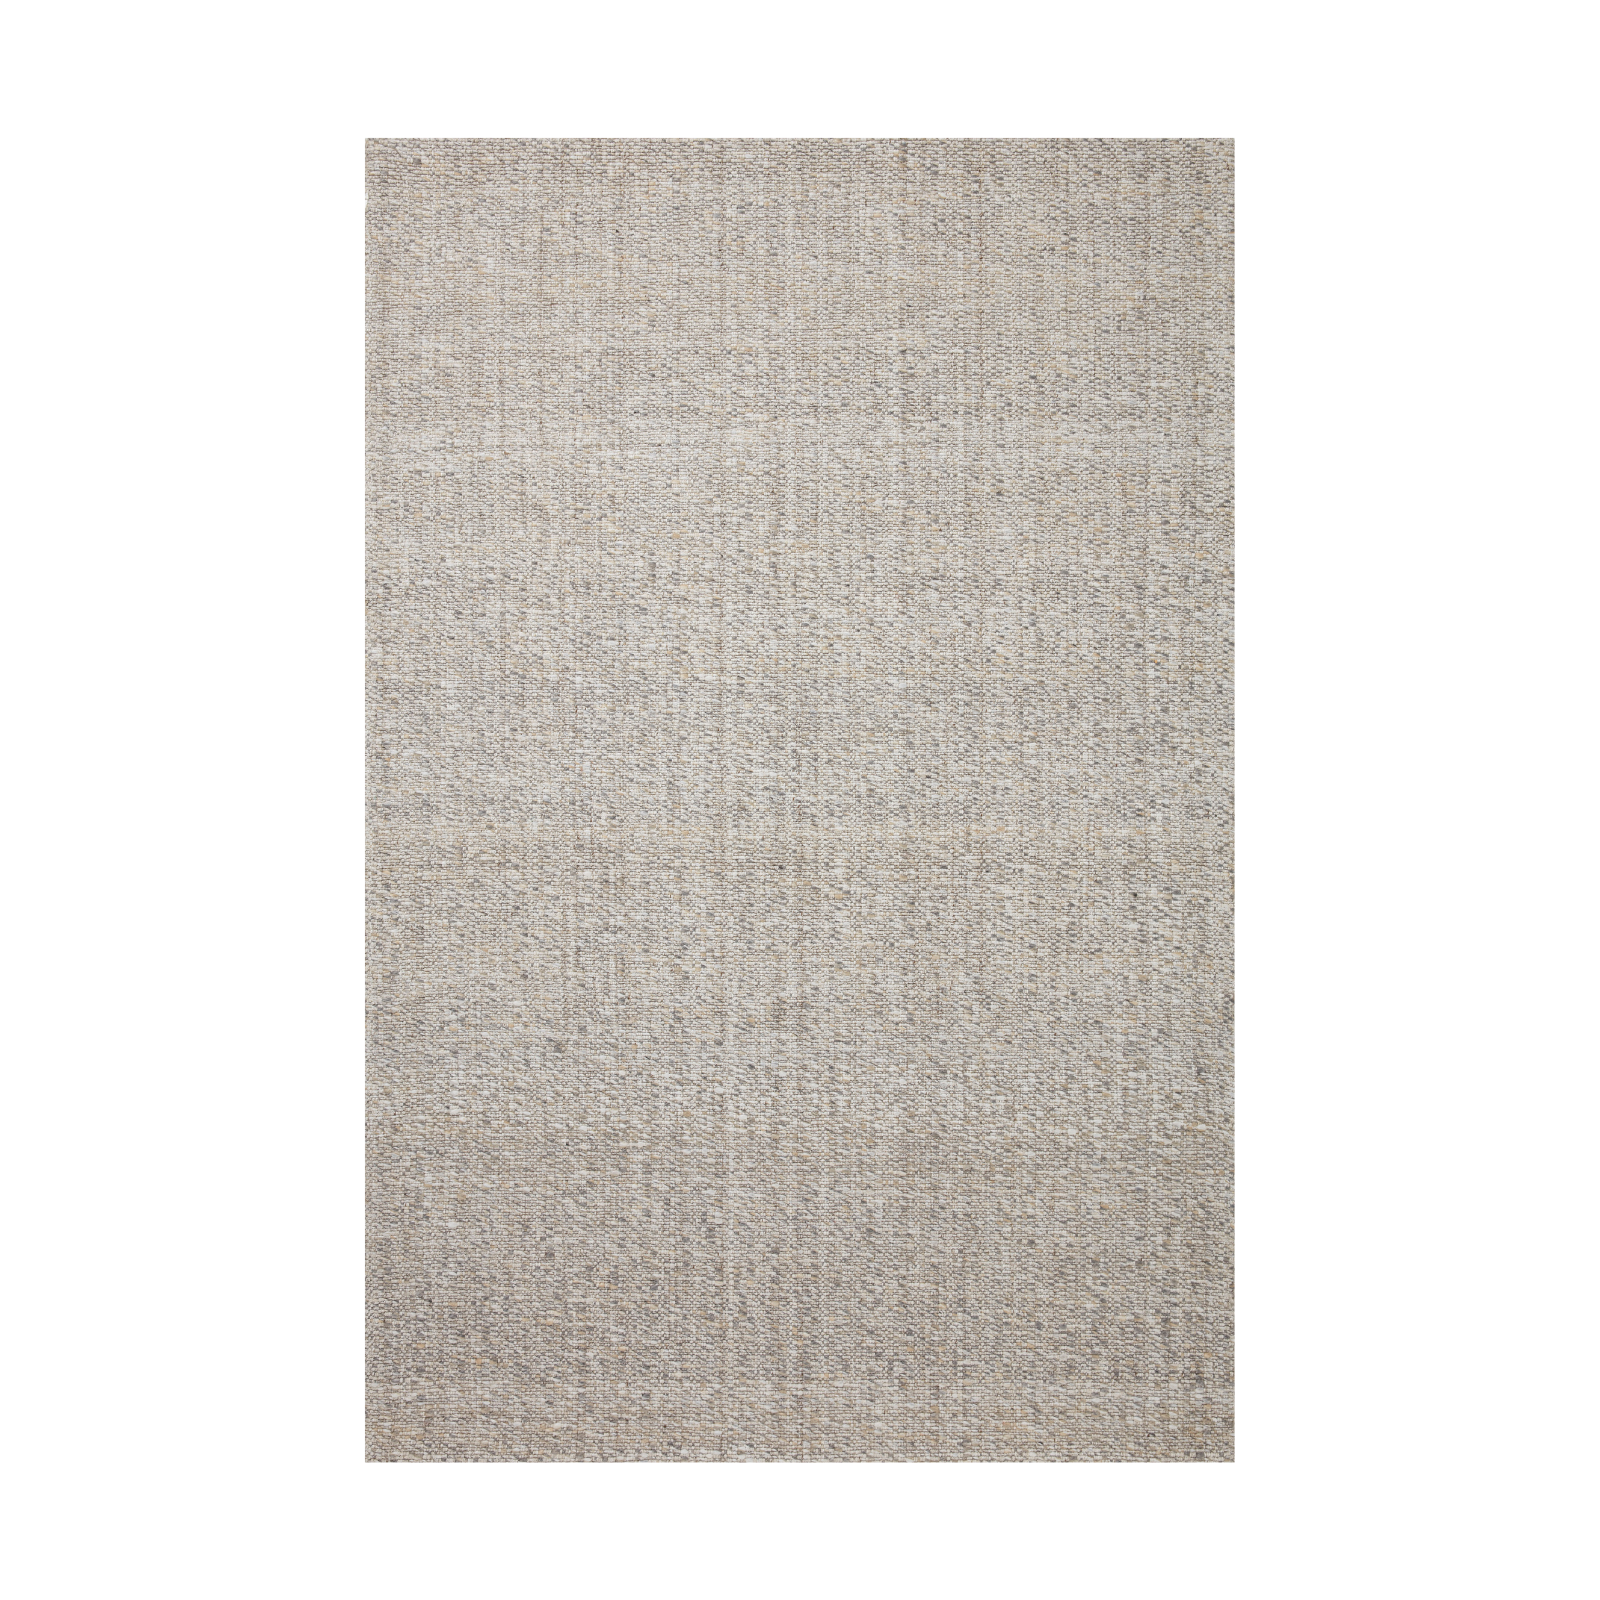 Magnolia Home by Joanna Gaines x Loloi Pippa Silver Rug